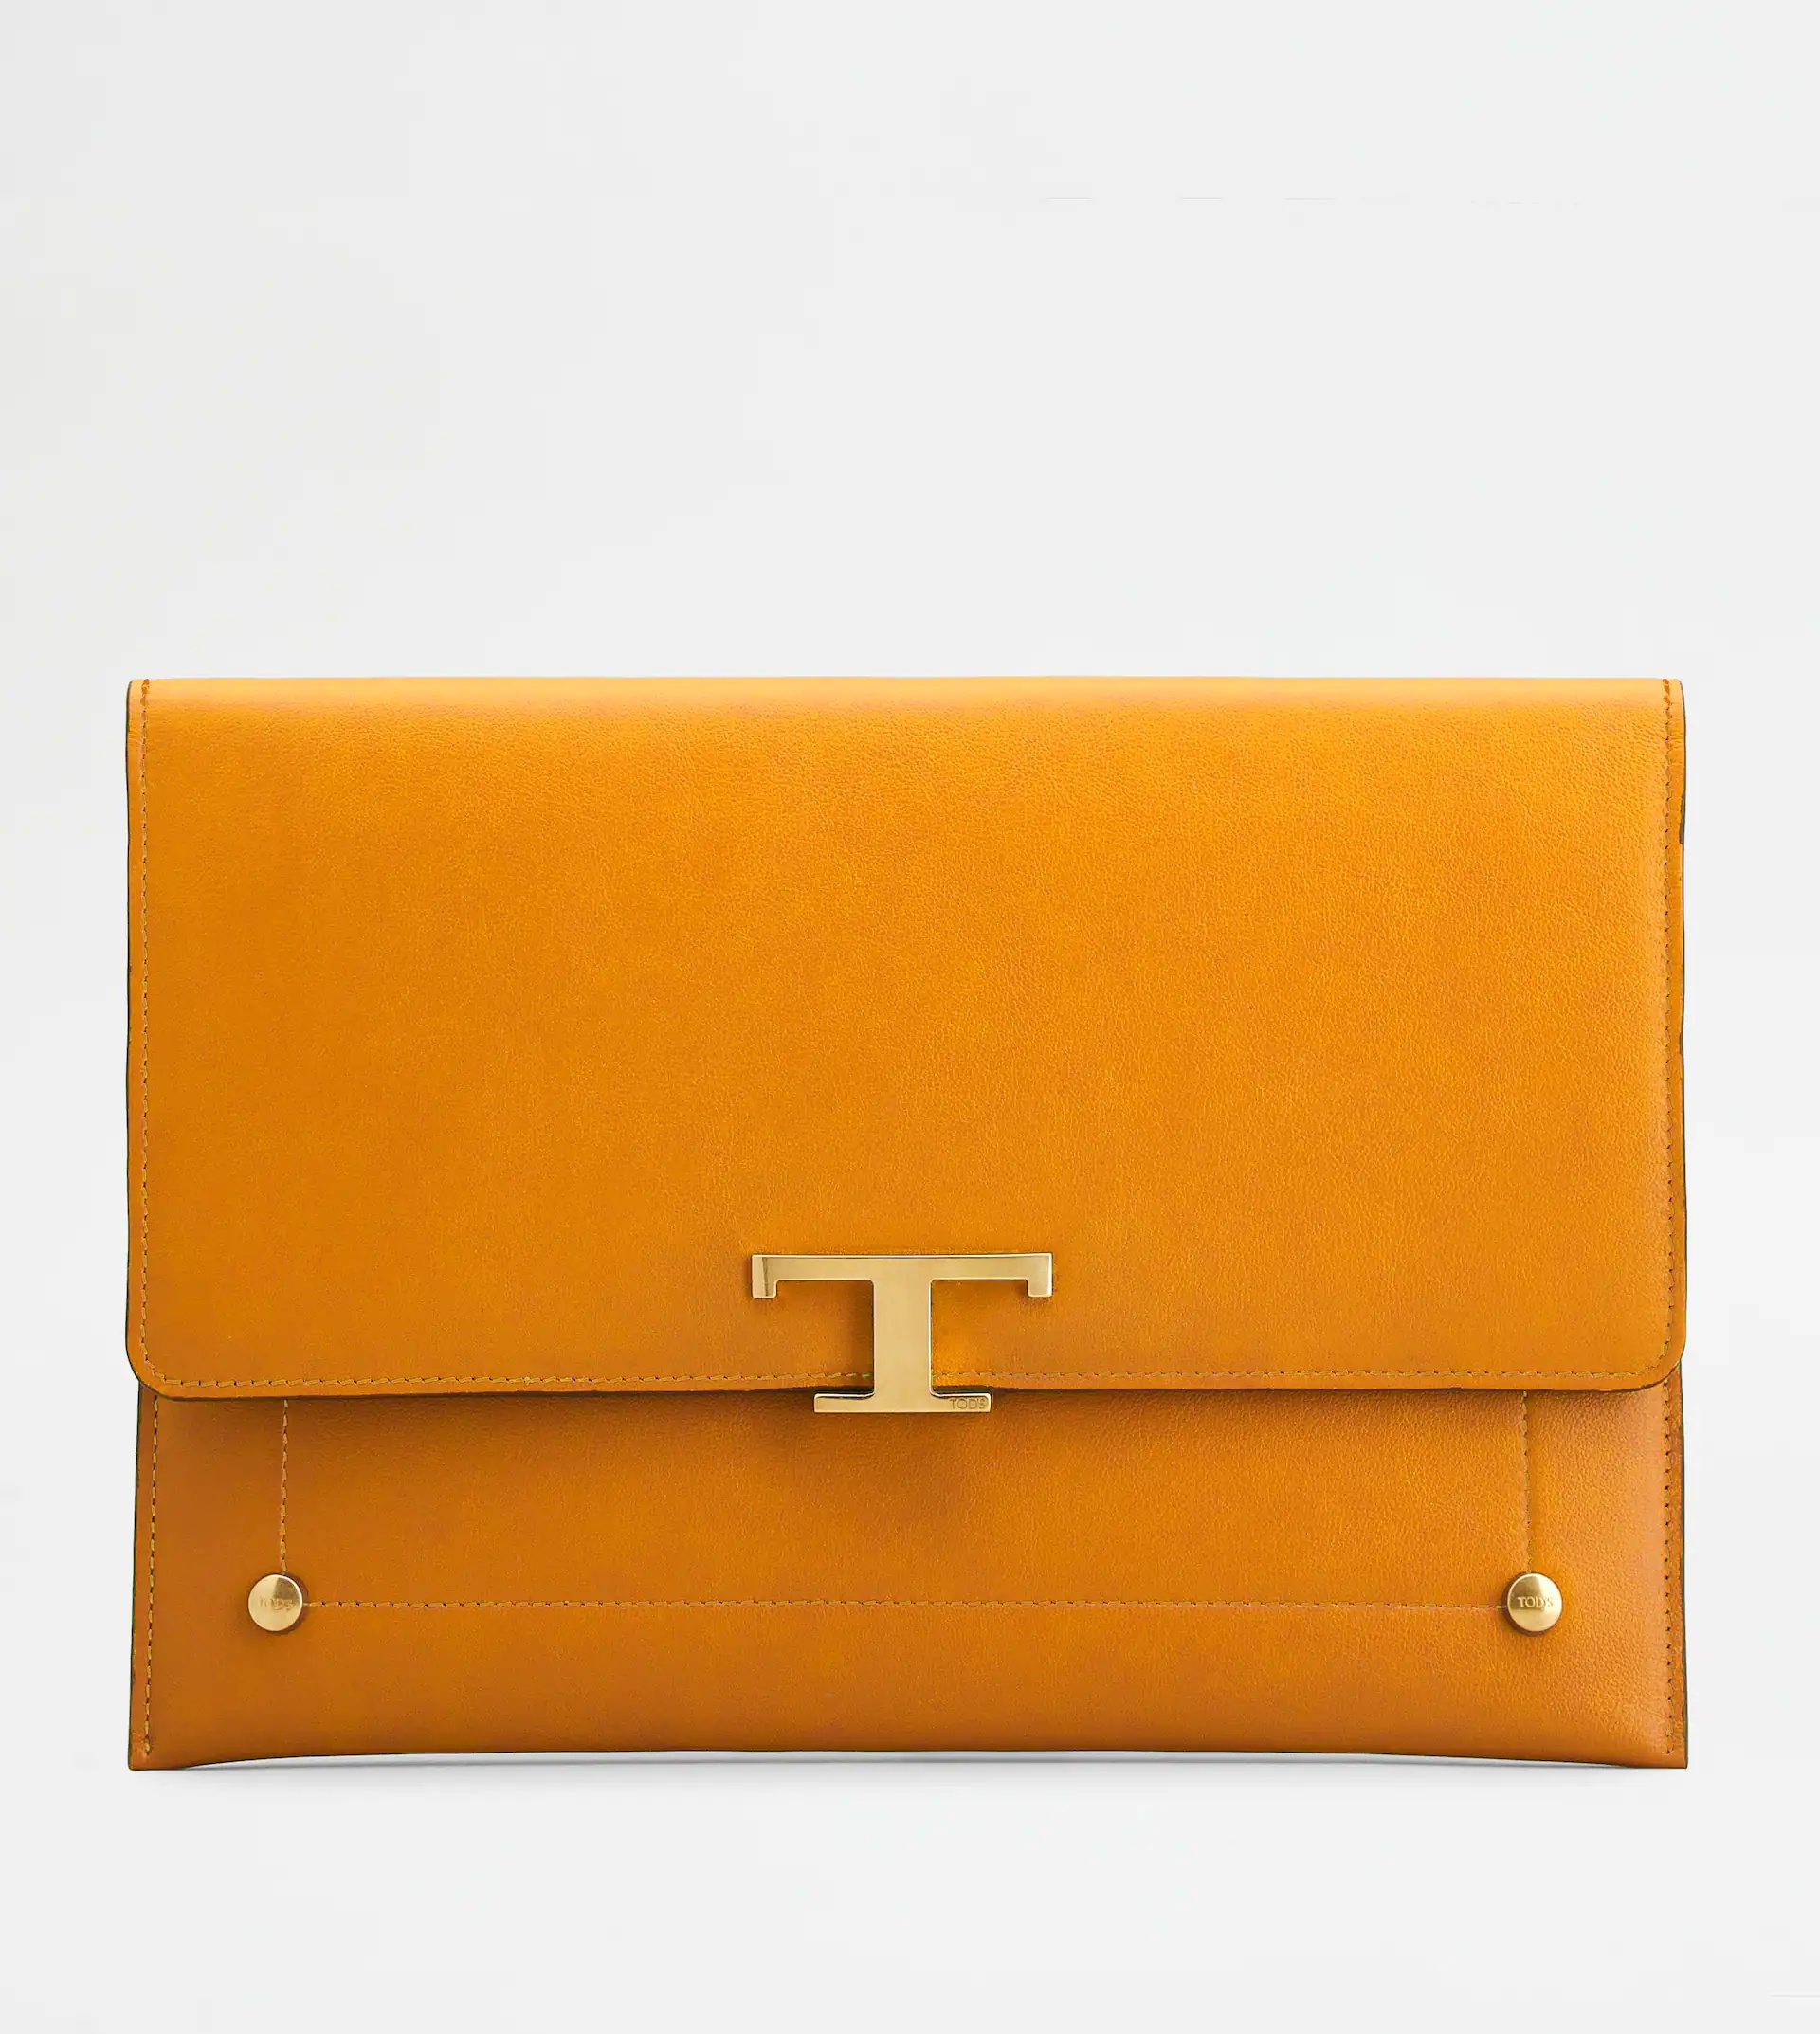 T TIMELESS ENVELOPE CLUTCH IN LEATHER LARGE - ORANGE - 1